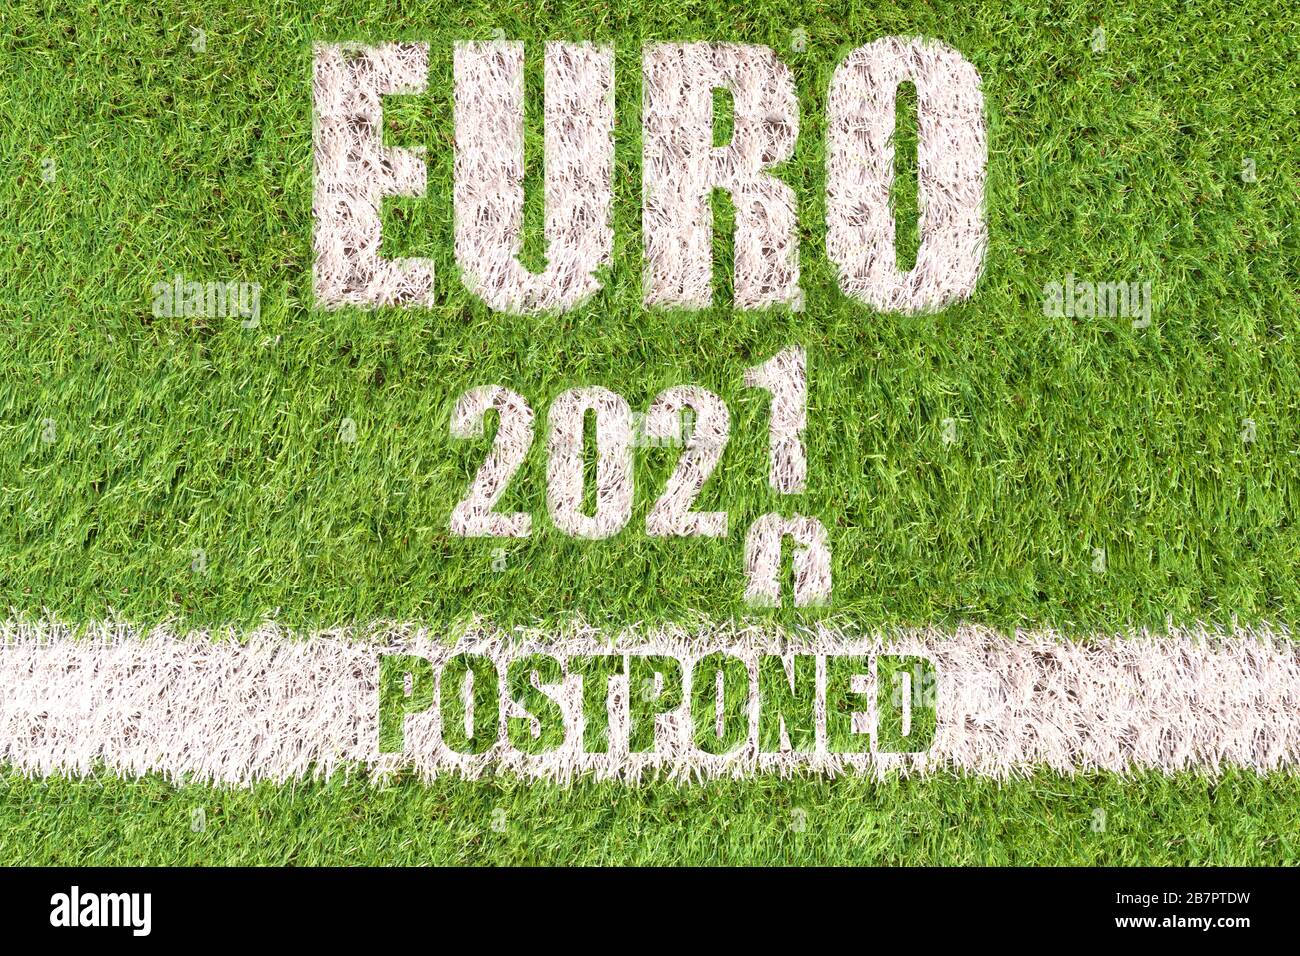 Euro 2020 postponed concept: text that announce that the european soccer tournamente will be postponed to 2021 due to the coronavirus crisis written o Stock Photo